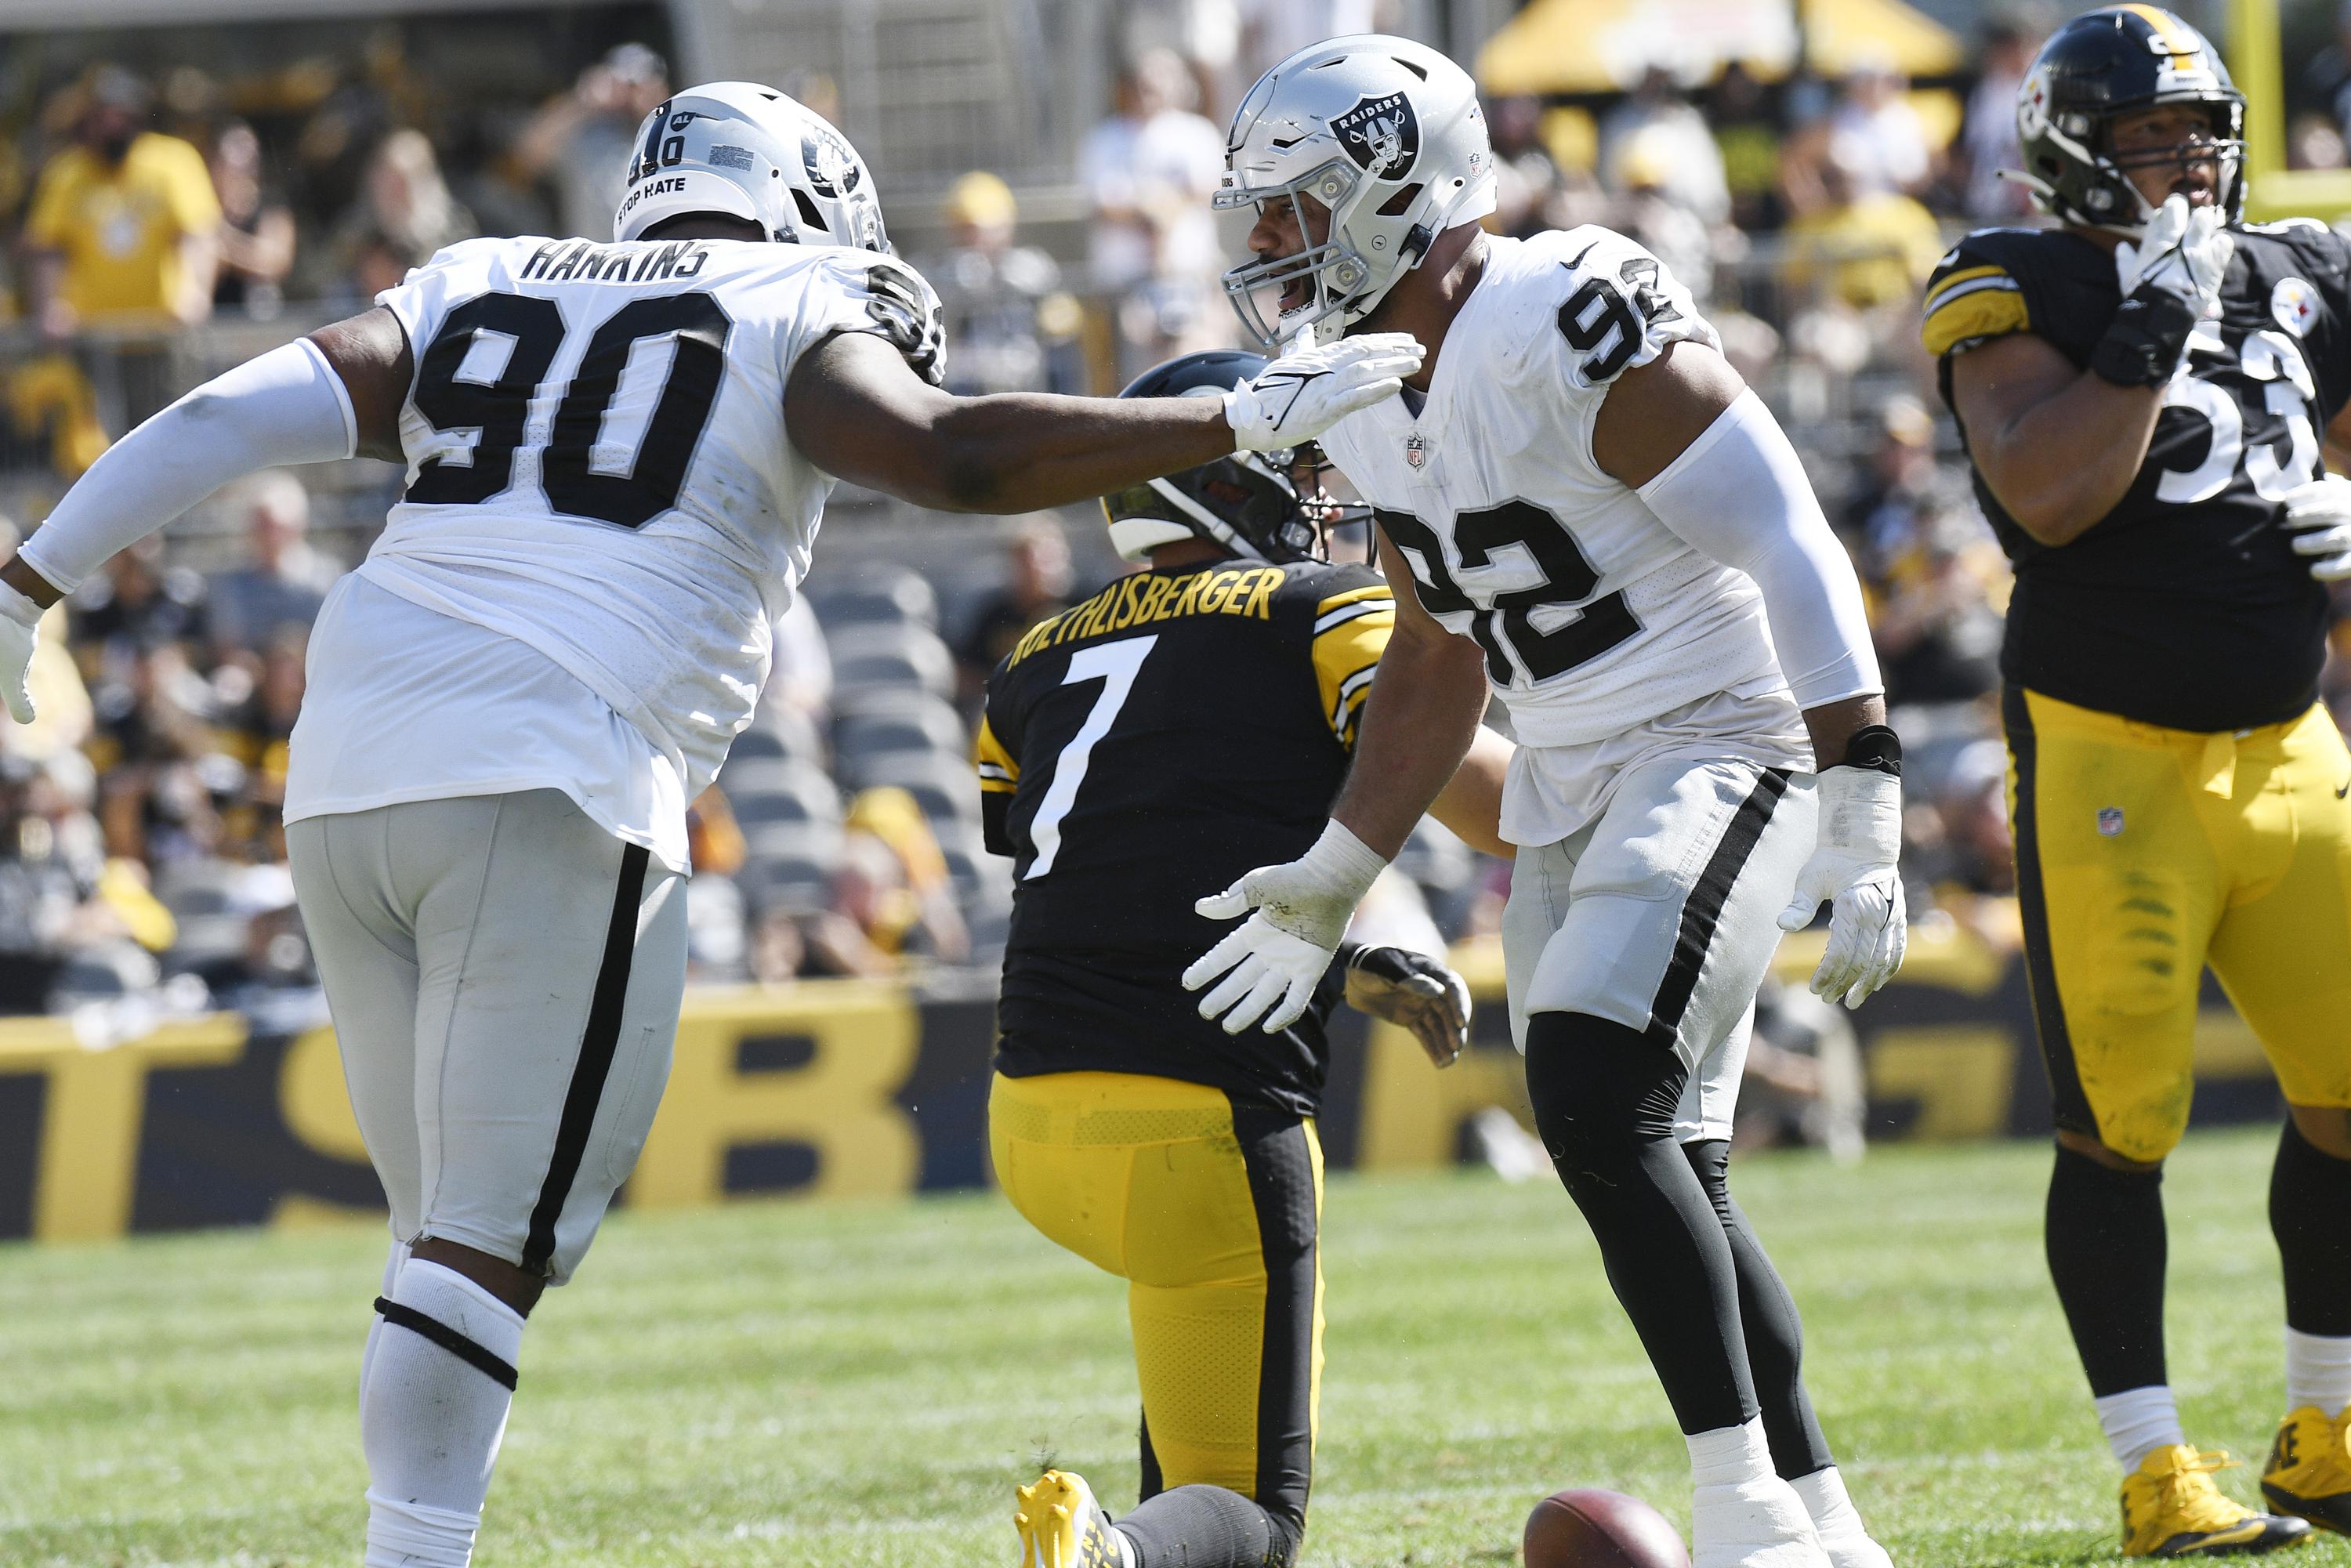 Carr throws for 382 yards, Raiders top Steelers 2617 AP News